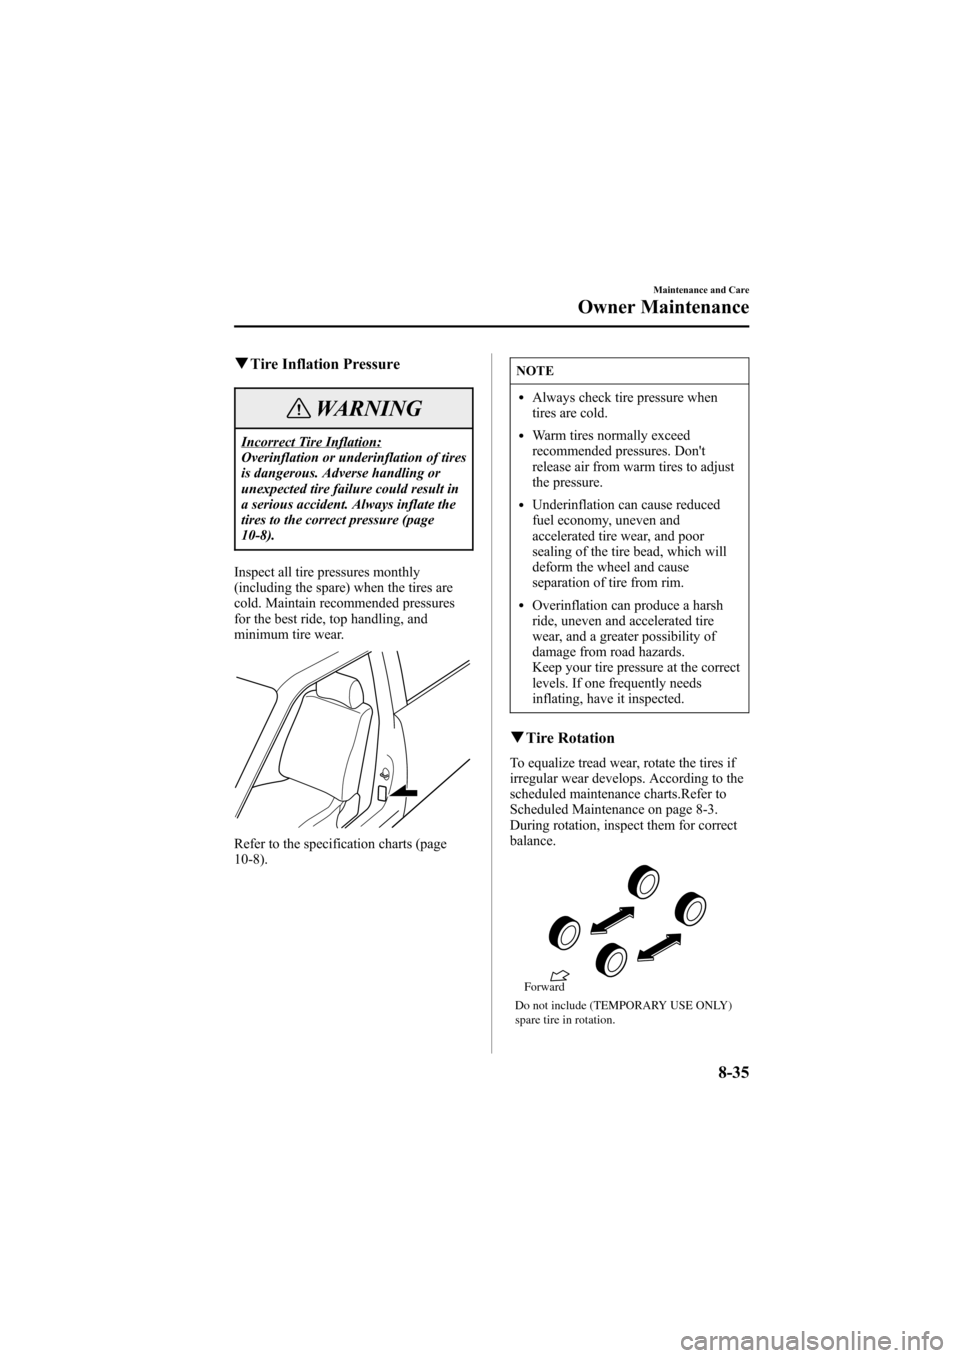 MAZDA MODEL 6 2007  Owners Manual (in English) Black plate (299,1)
qTire Inflation Pressure
WARNING
Incorrect Tire Inflation:
Overinflation or underinflation of tires
is dangerous. Adverse handling or
unexpected tire failure could result in
a seri